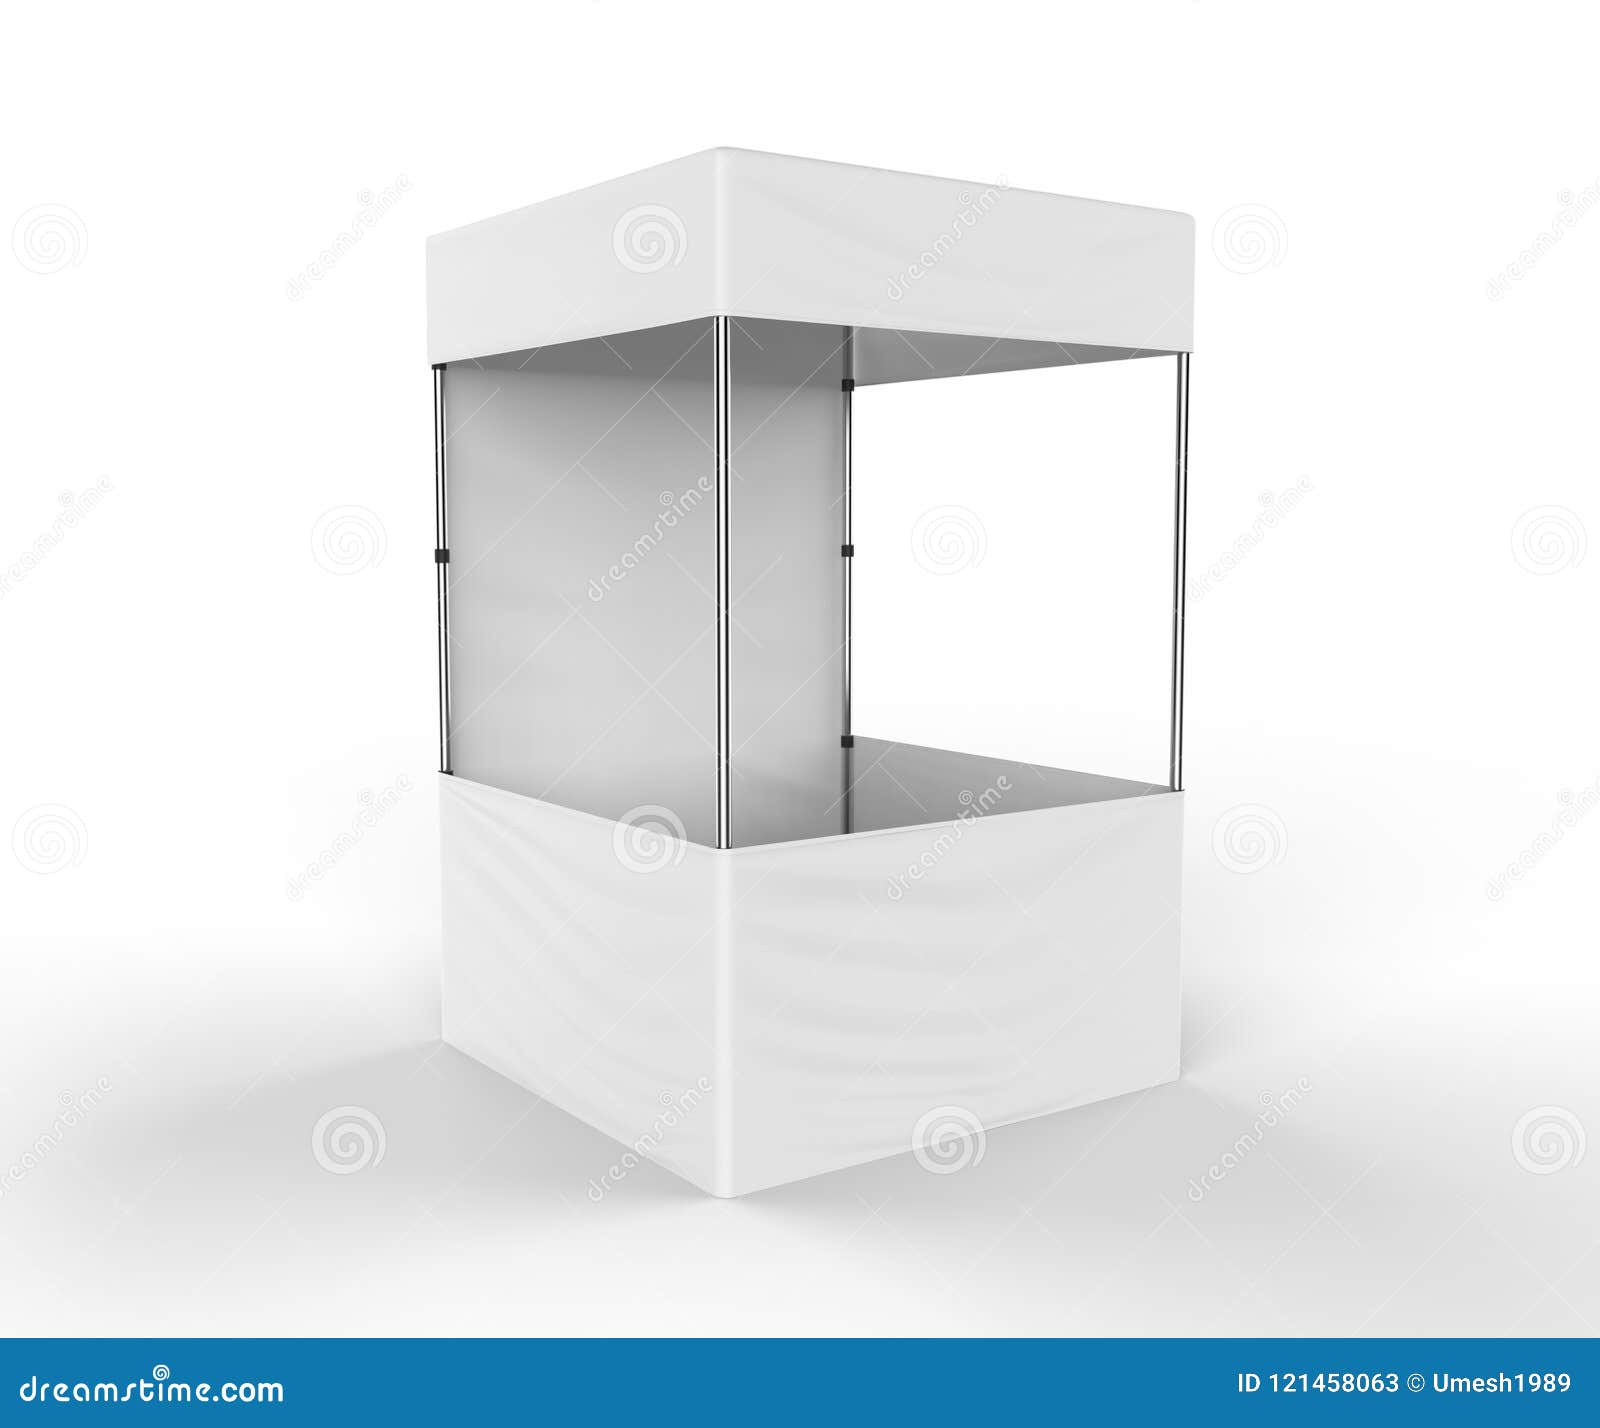 Promotional Advertising Outdoor Event Trade Show Canopy Table Tent